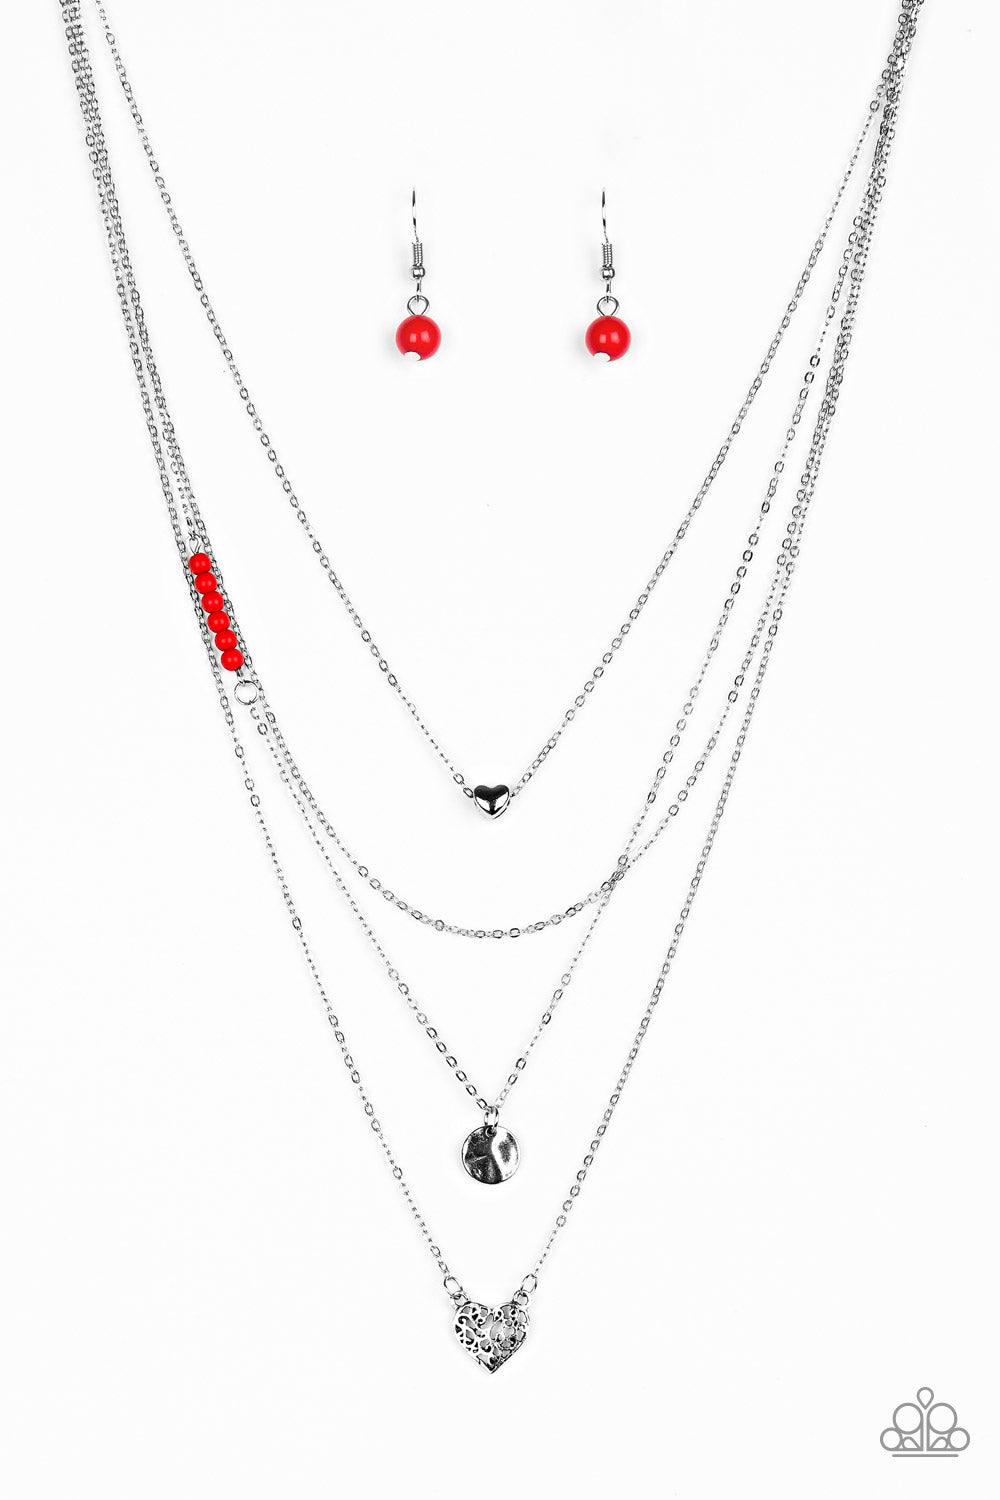 Gypsy Heart - Red Layered Necklace Set - Princess Glam Shop